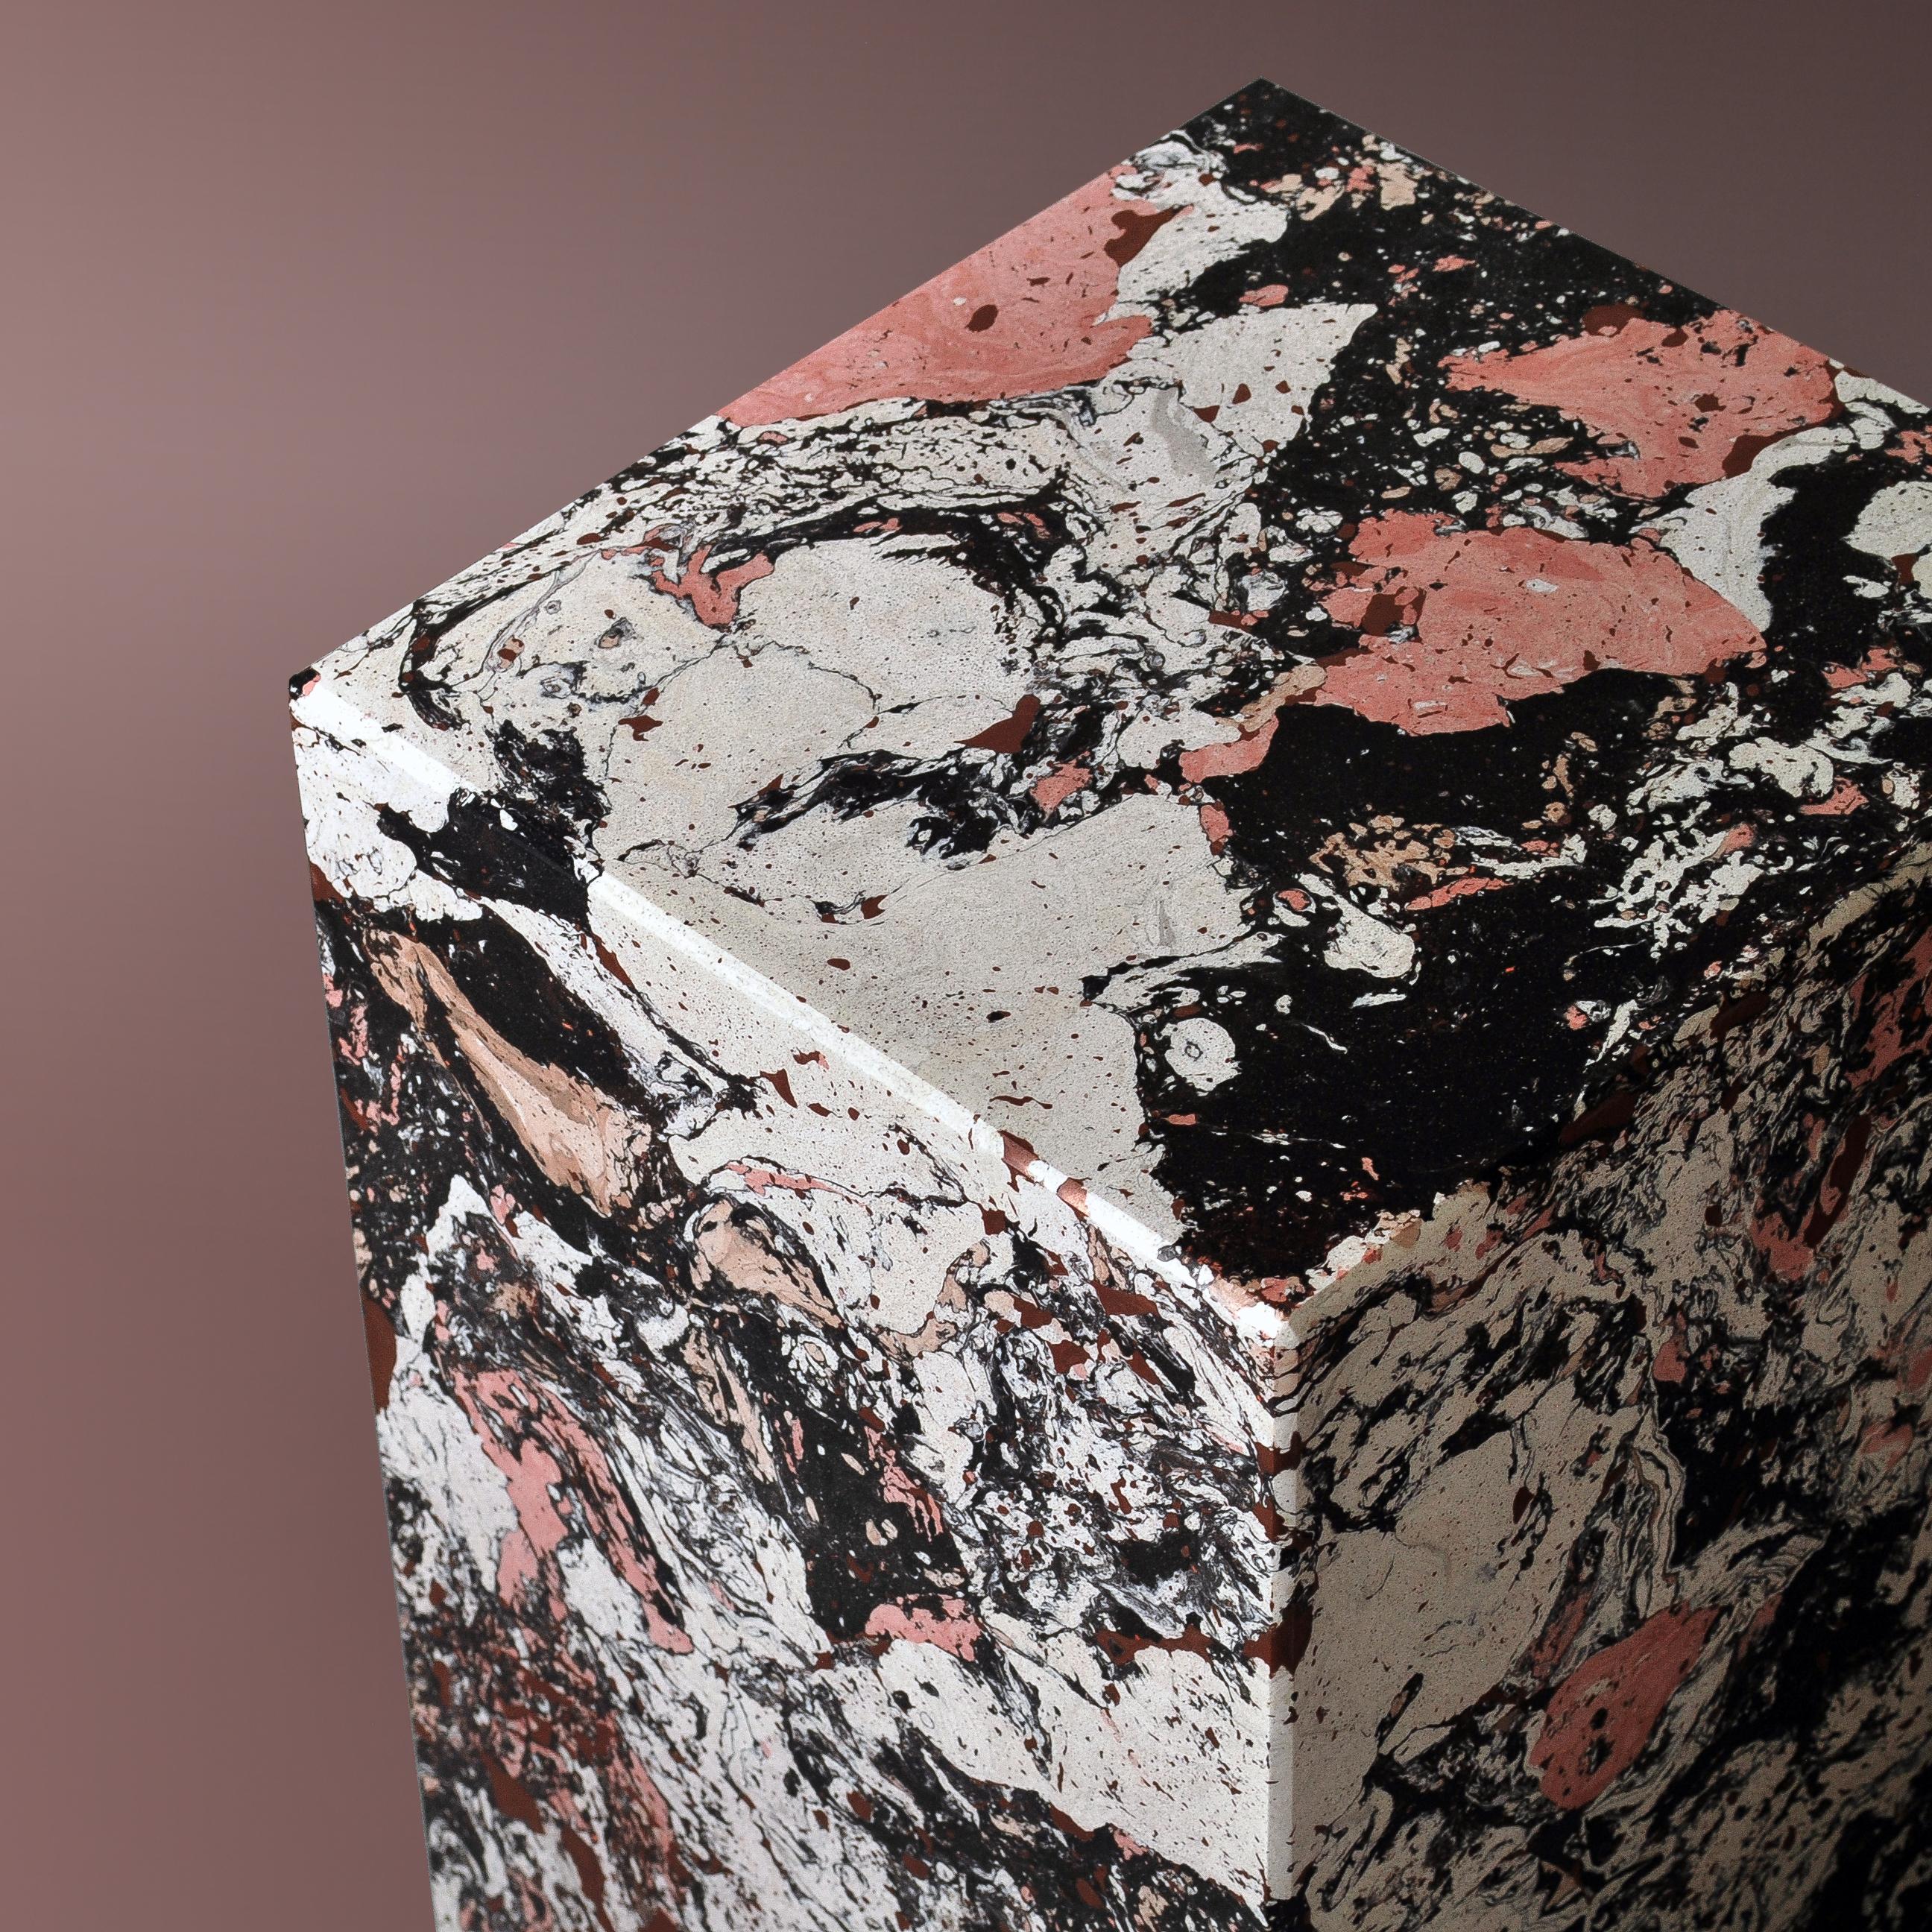 Scagliola side table created using selected natural pigments & liquid copper metal. This is a one-off piece cast by hand and finished with natural oils and waxes.

Colourway - Mars black, ivory white, rose pink, calamine and liquid copper.
 